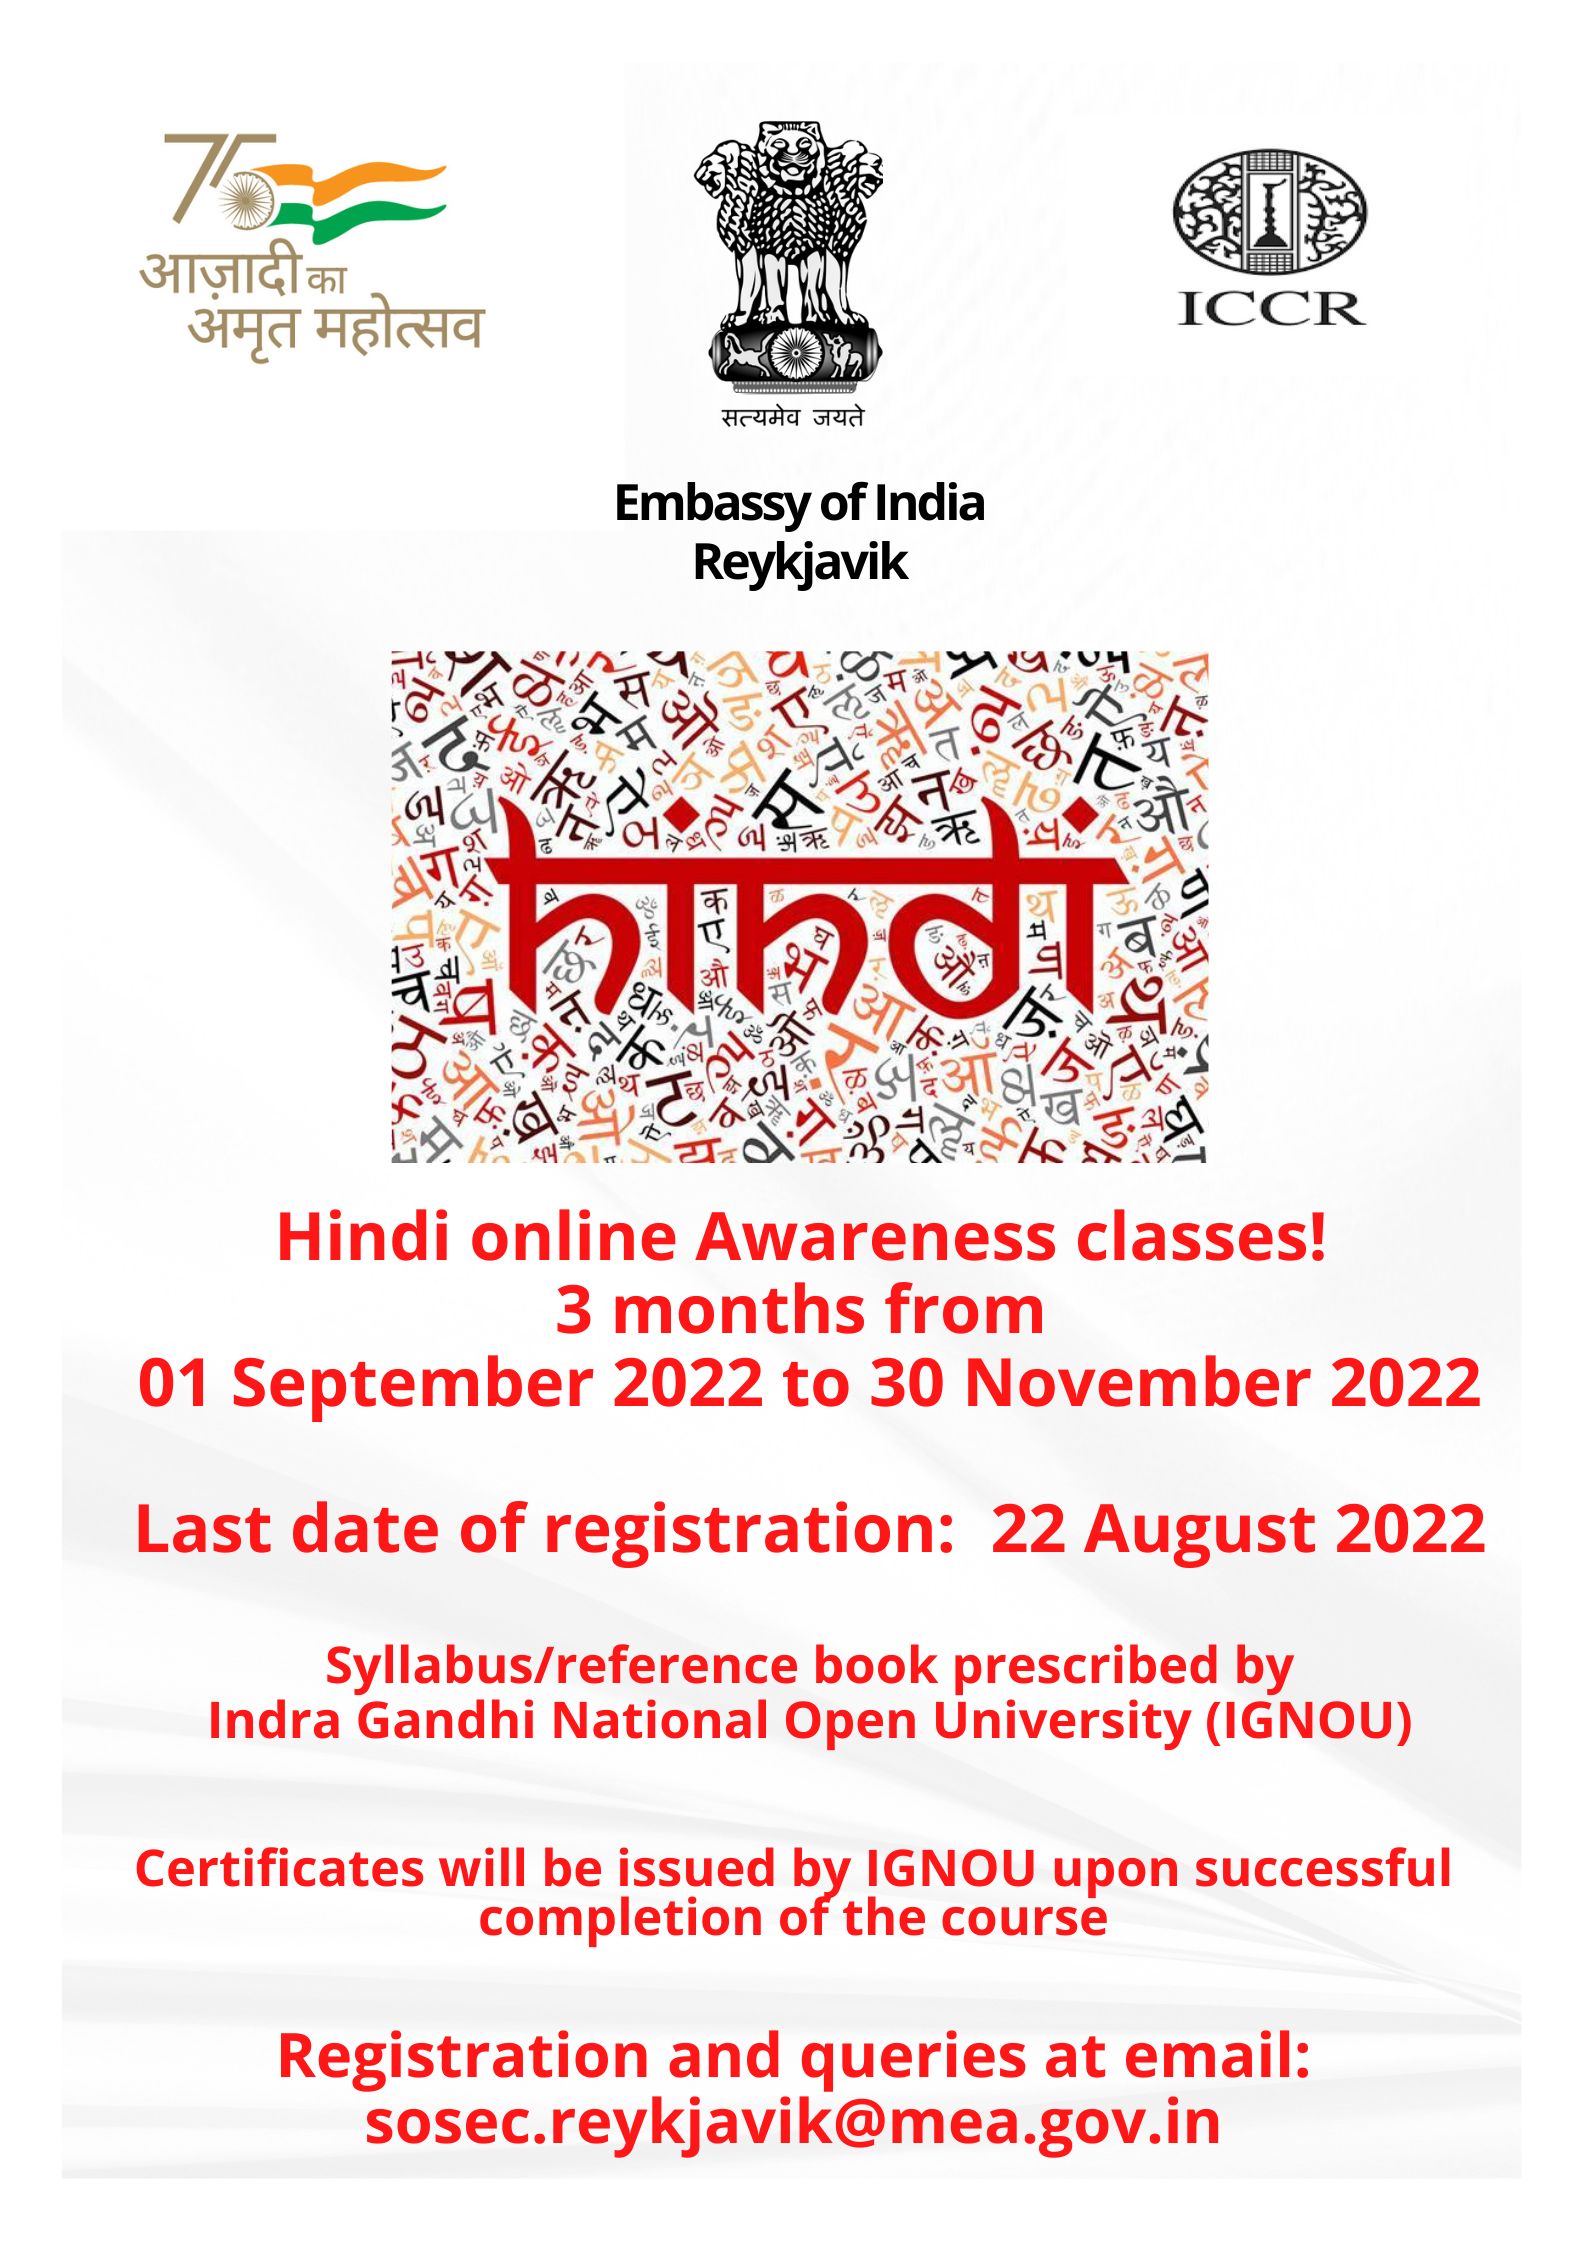 Online 3-month Hindi Awareness Course by ICCR